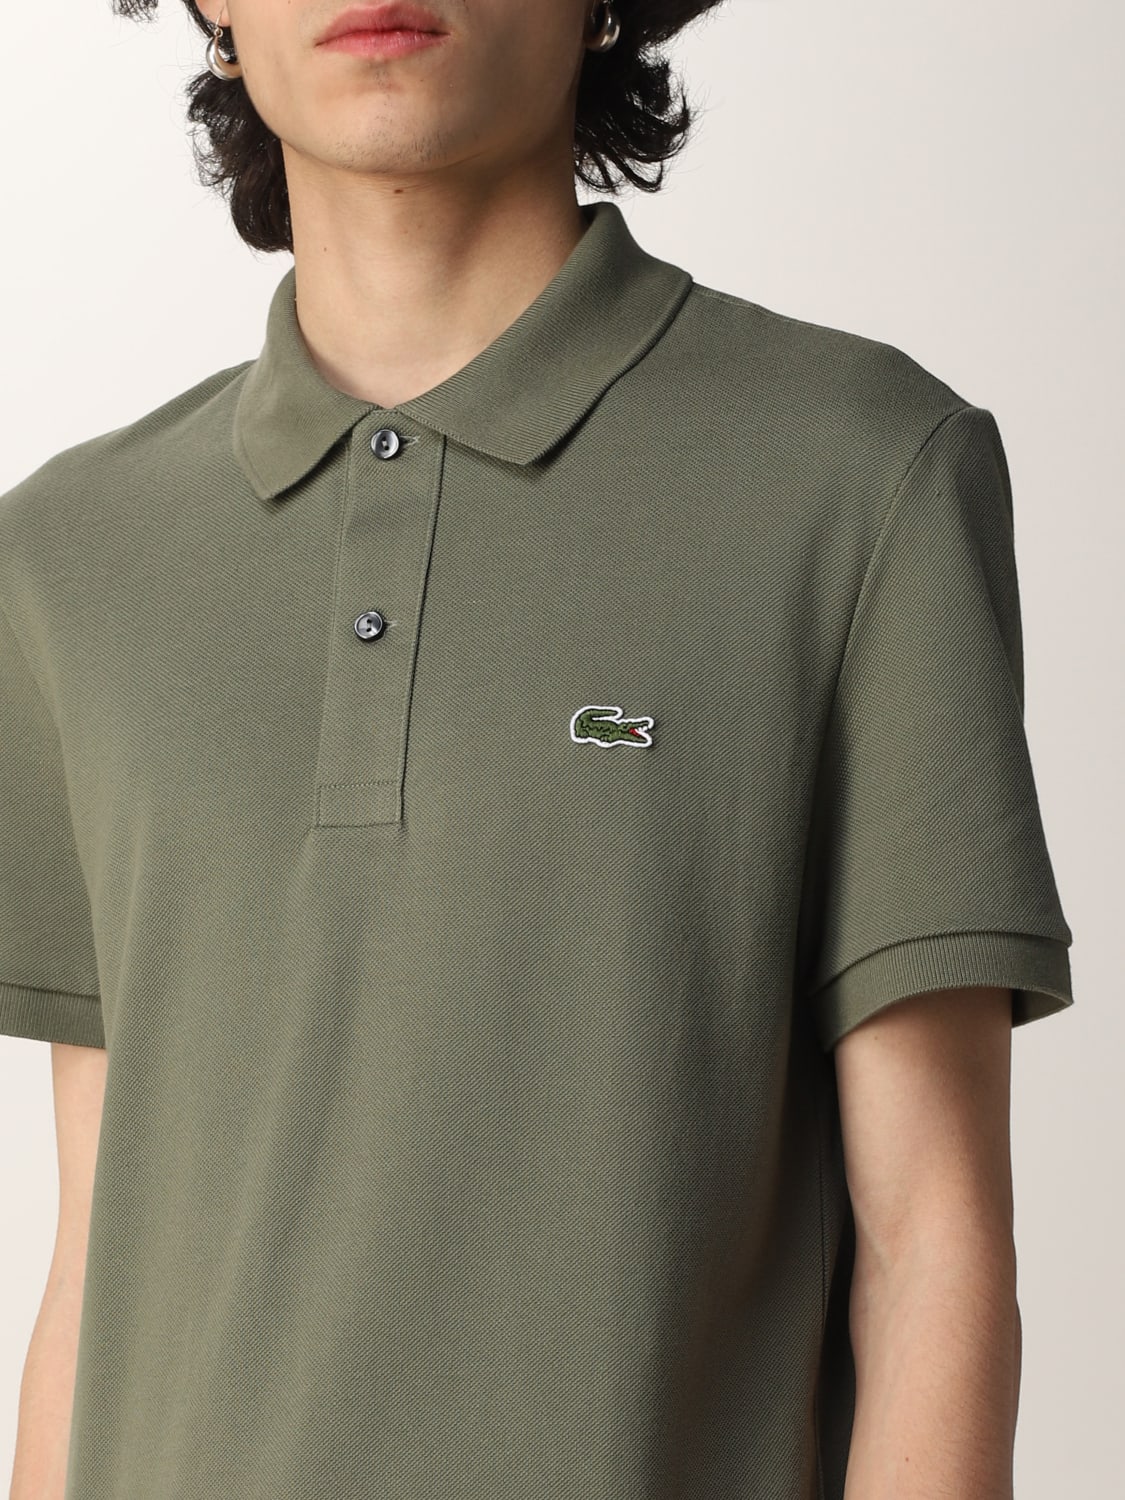 Lacoste Outlet: basic polo shirt with logo - | Lacoste polo shirt PH4012 online at GIGLIO.COM